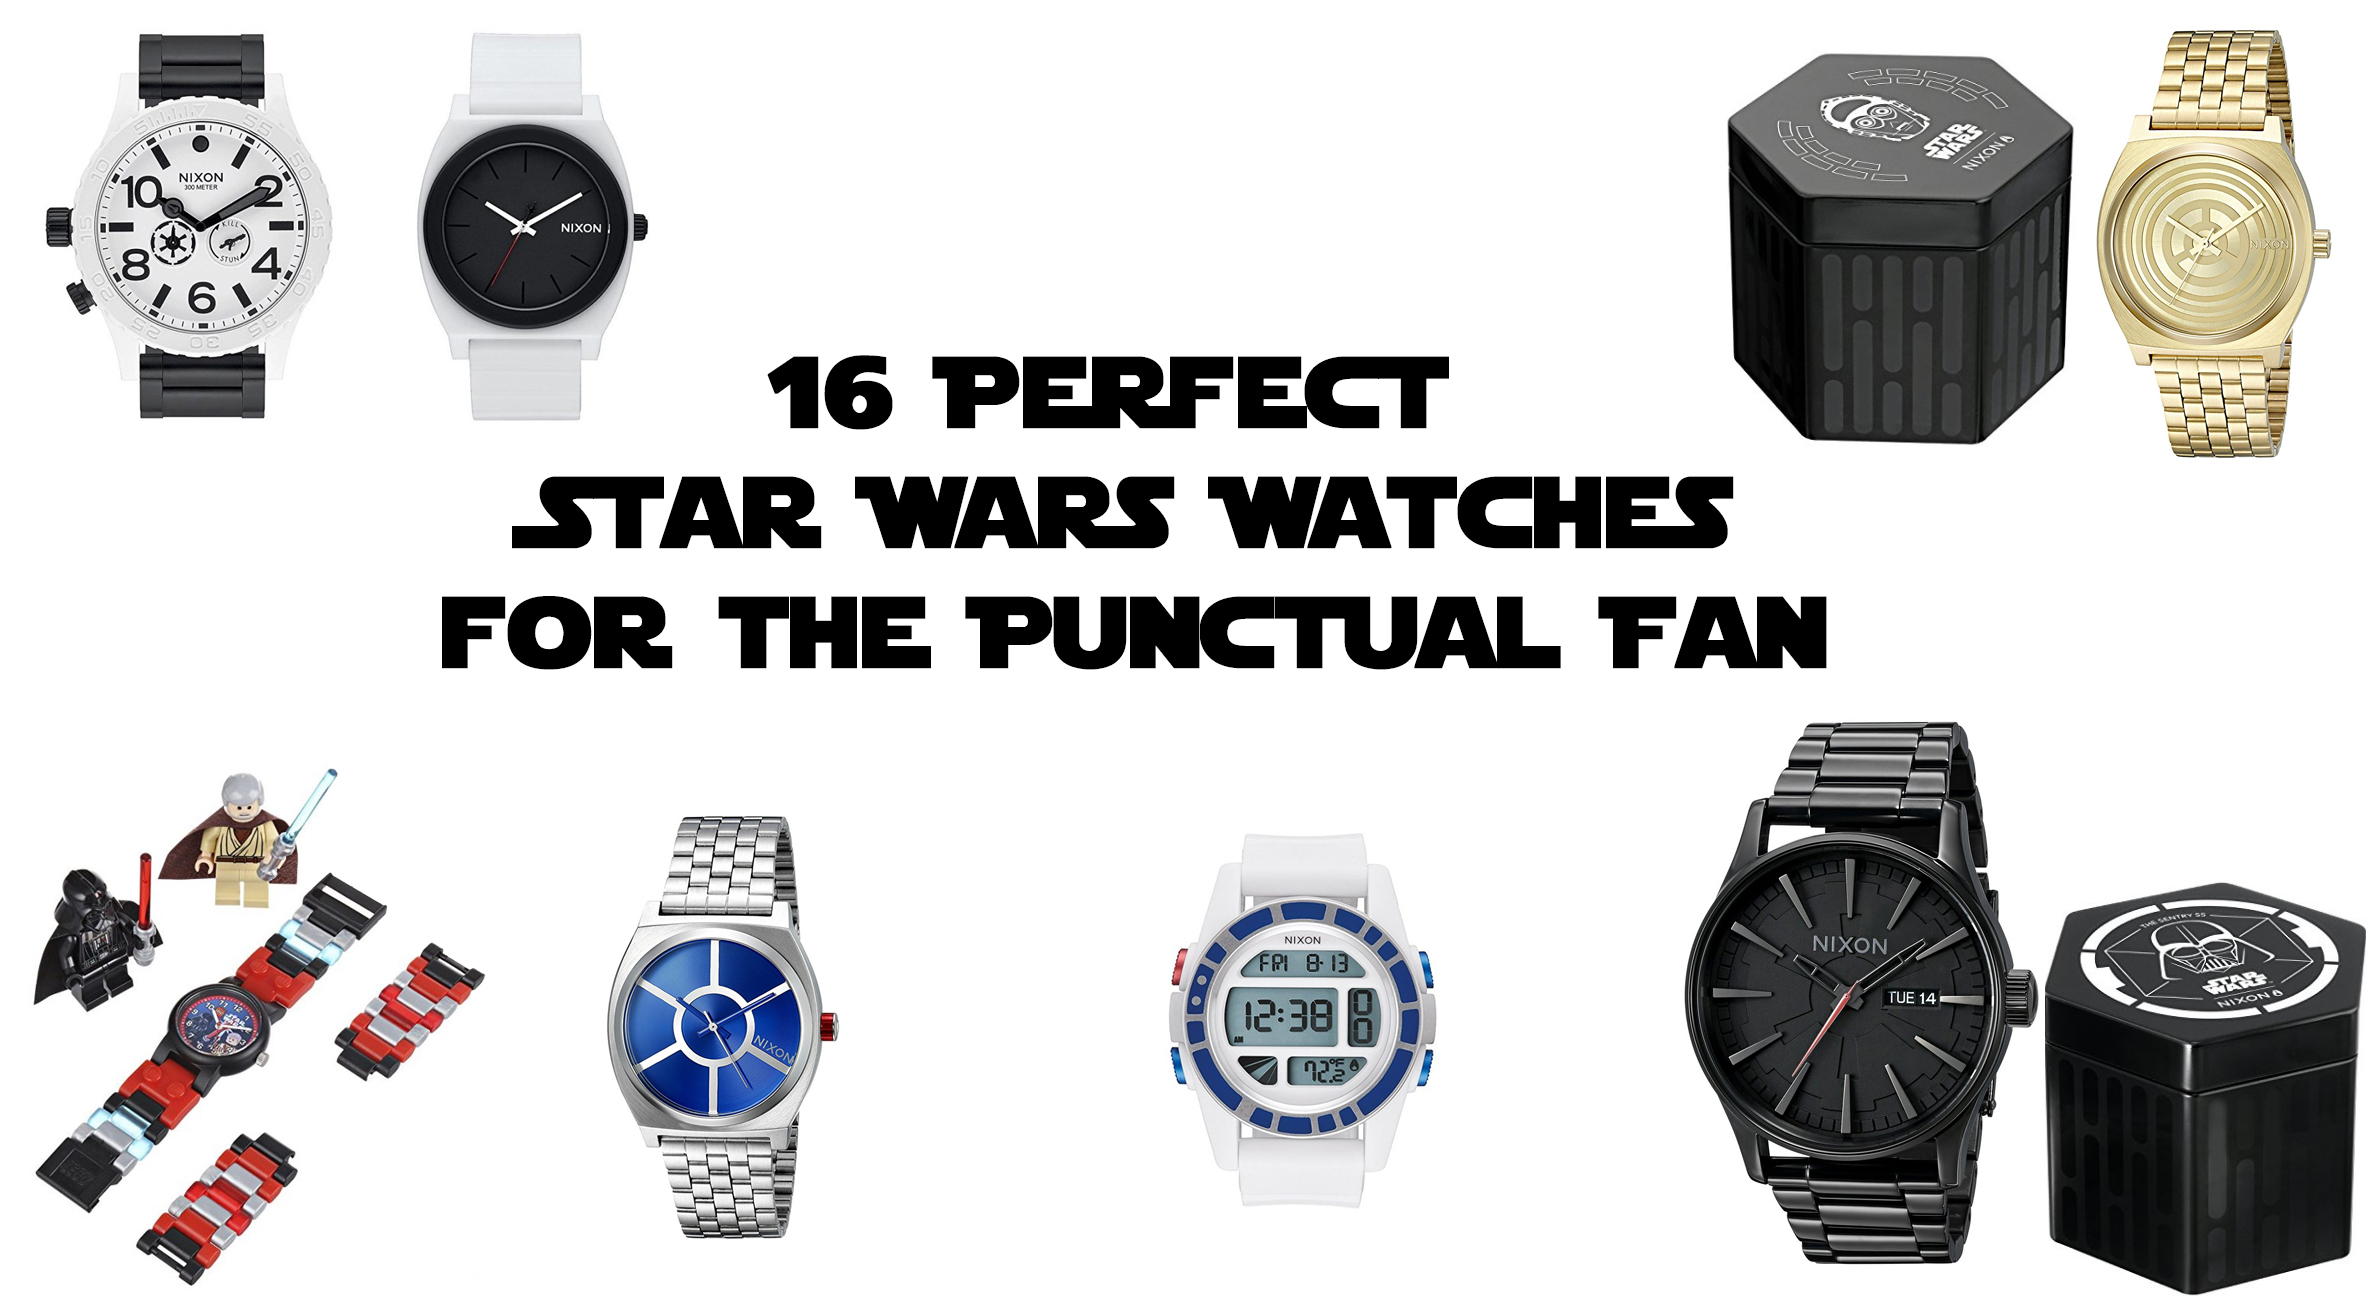 16 Perfect Star Wars Watches for the Punctual Fan